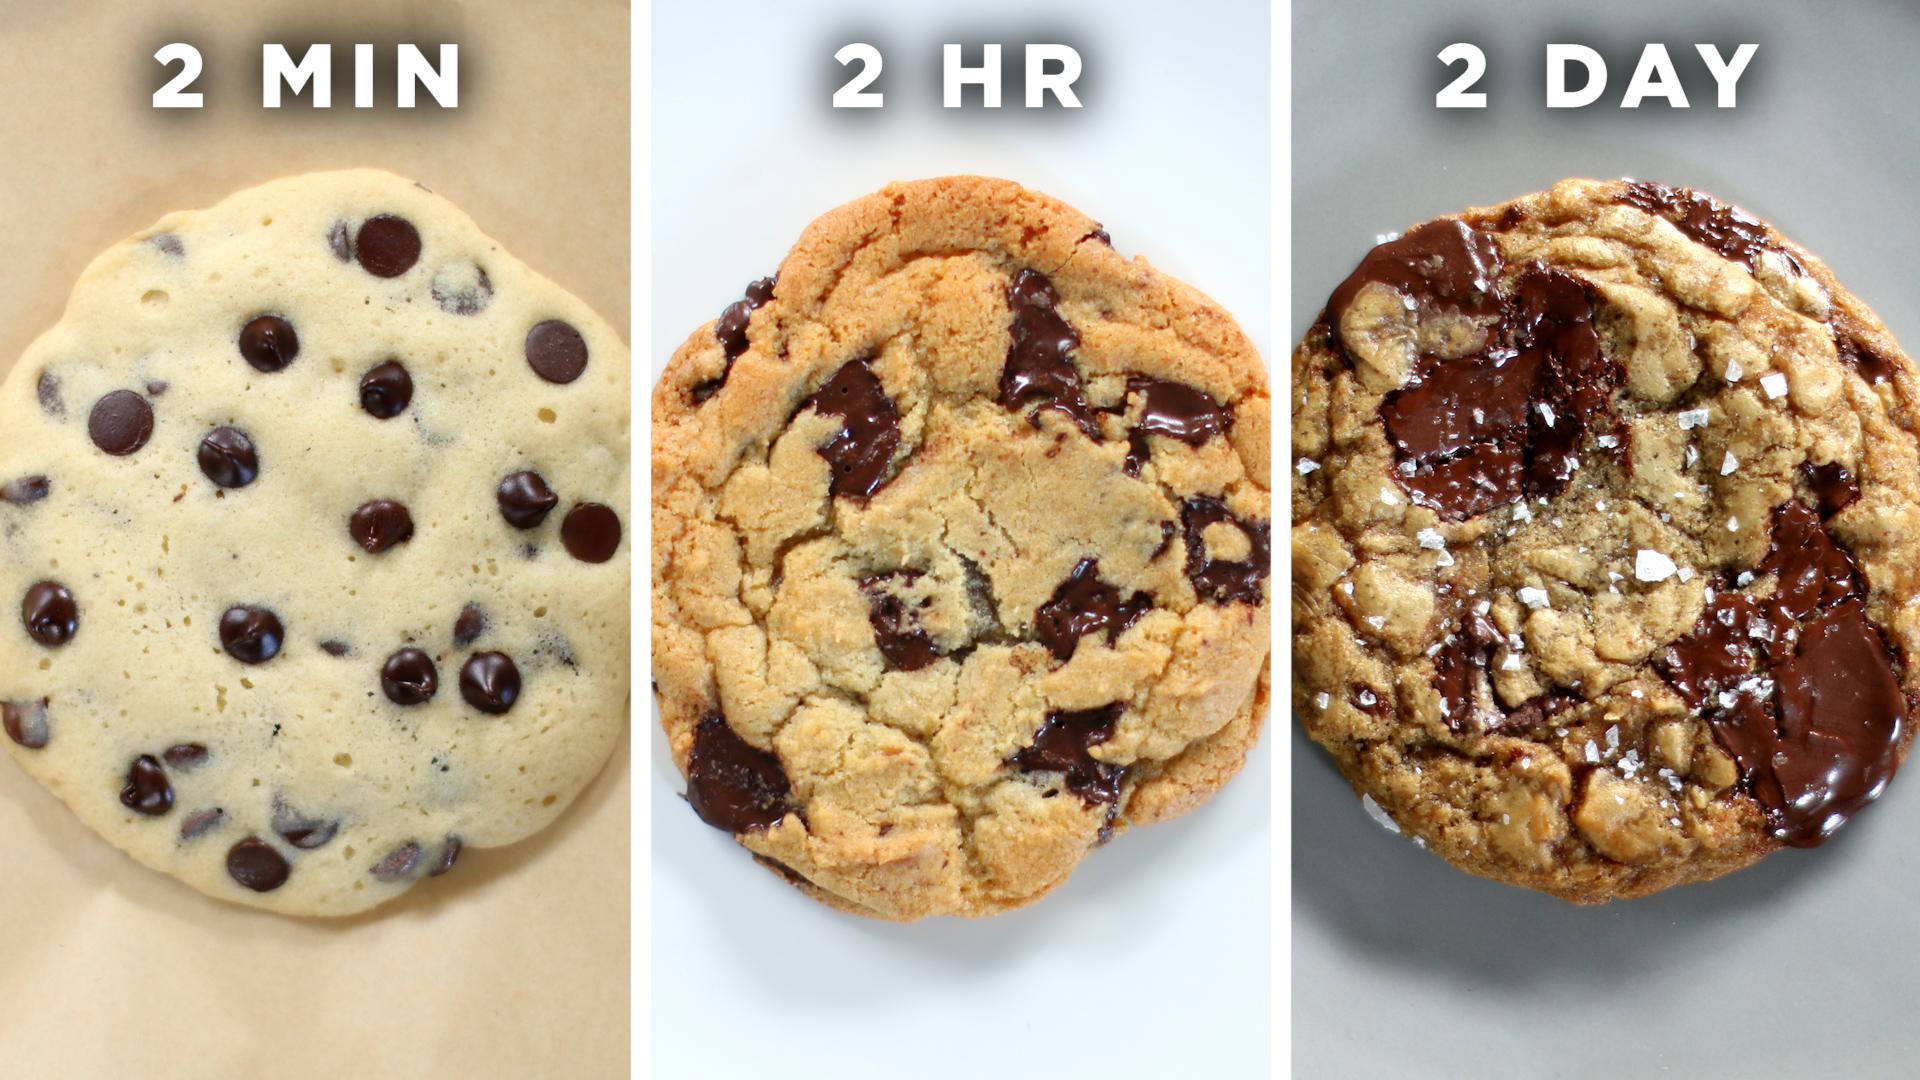 2-Minute Chocolate Chip Cookie Recipe by Tasty